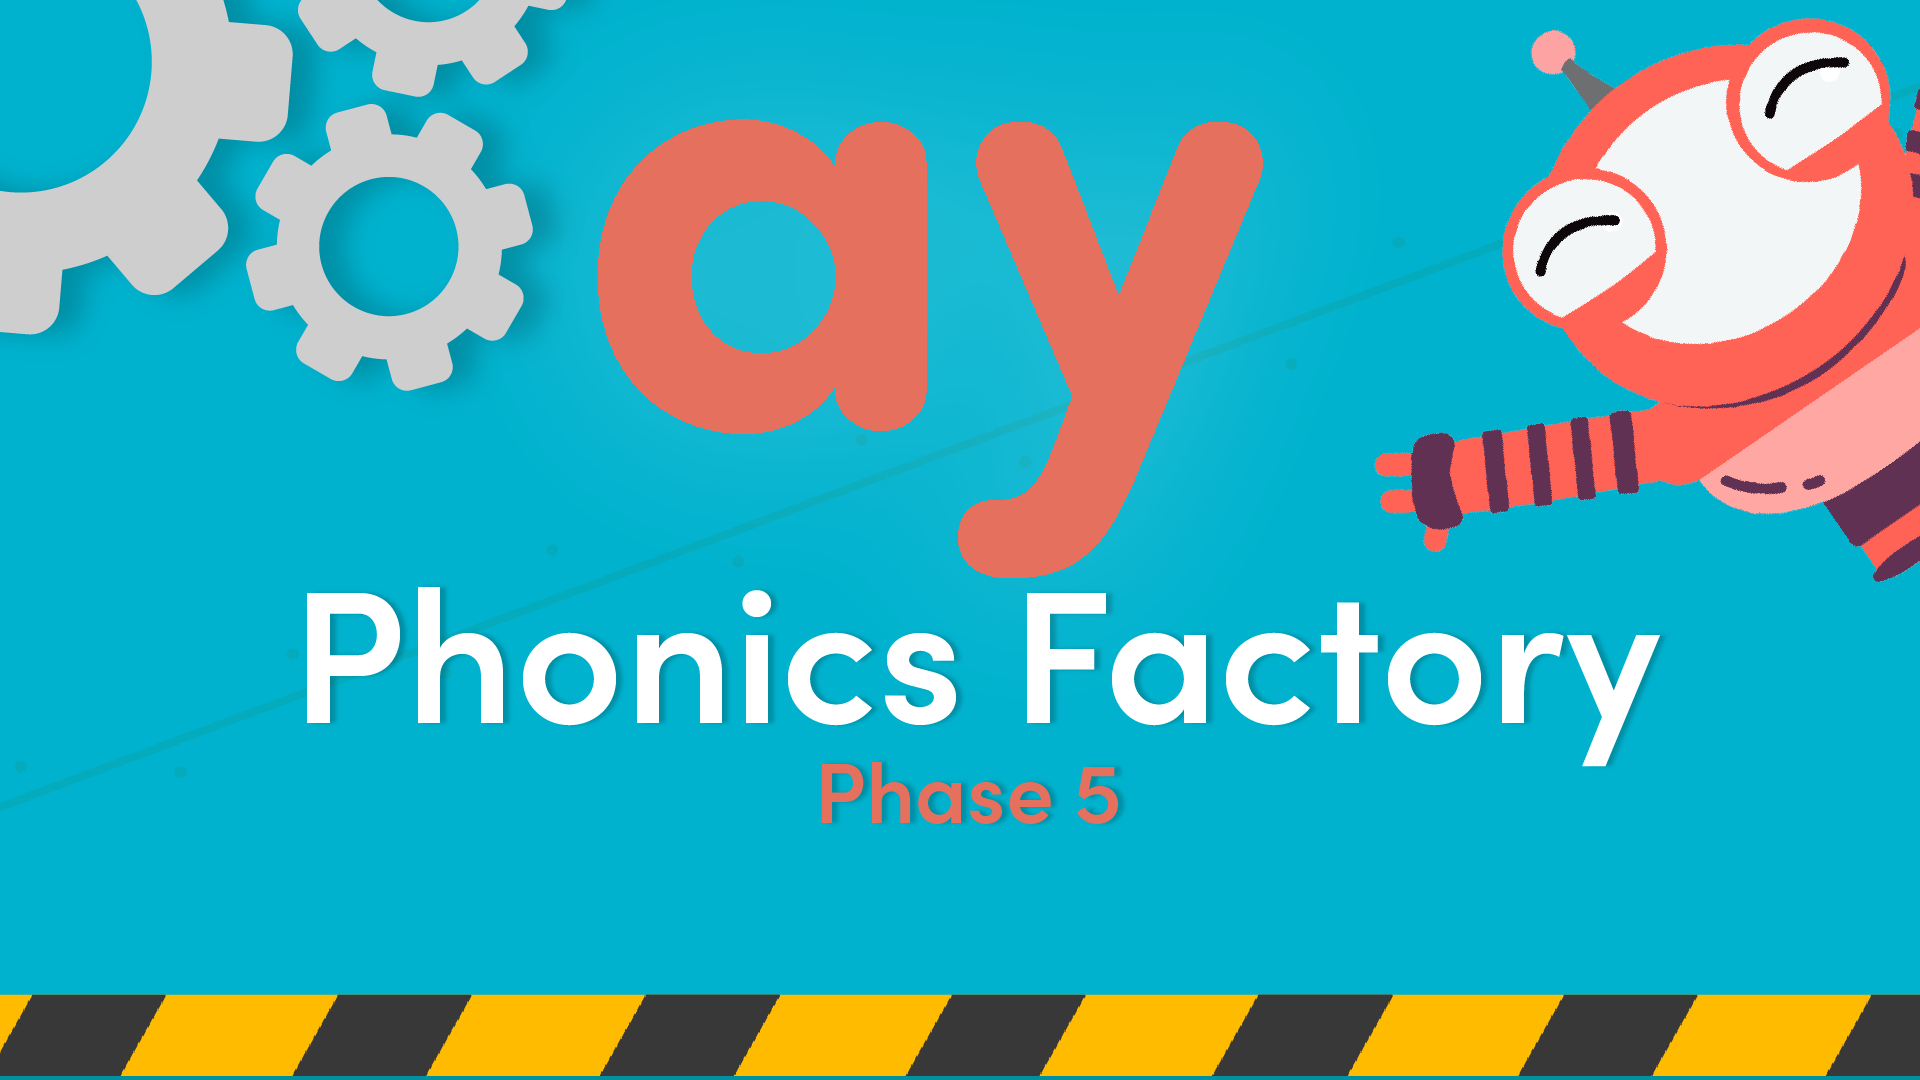 Phonics Phase 5 ay Sound Video in the Phonics Factory | Classroom